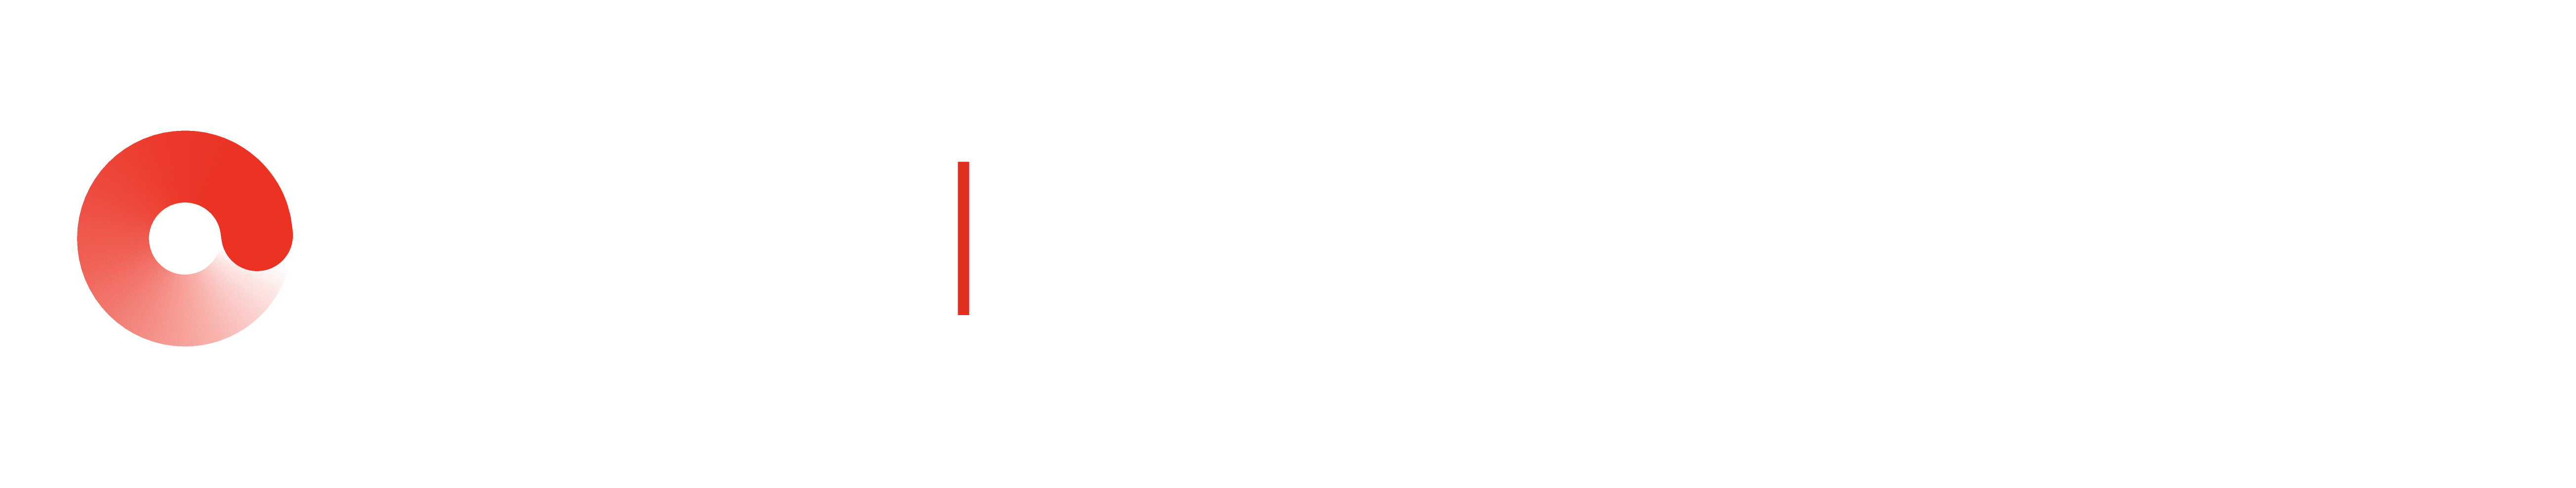 Mystery_Shopping_Solutions_Grace Hill - Mystery Shopping-White